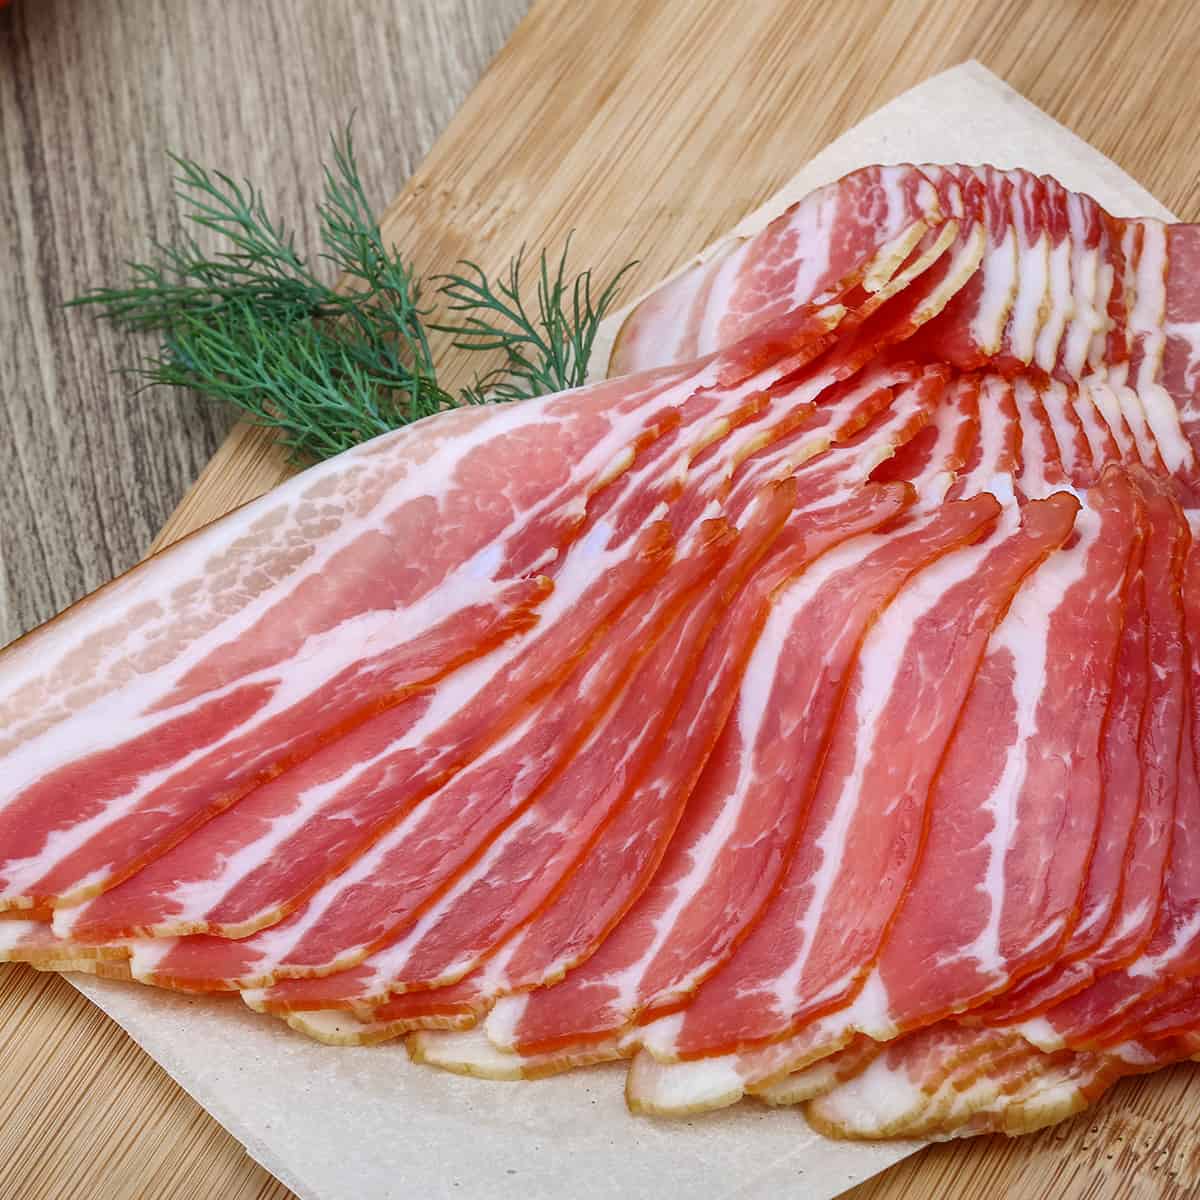 Bacon slices on a wooden surface with a sprig of an herb tucked inside.